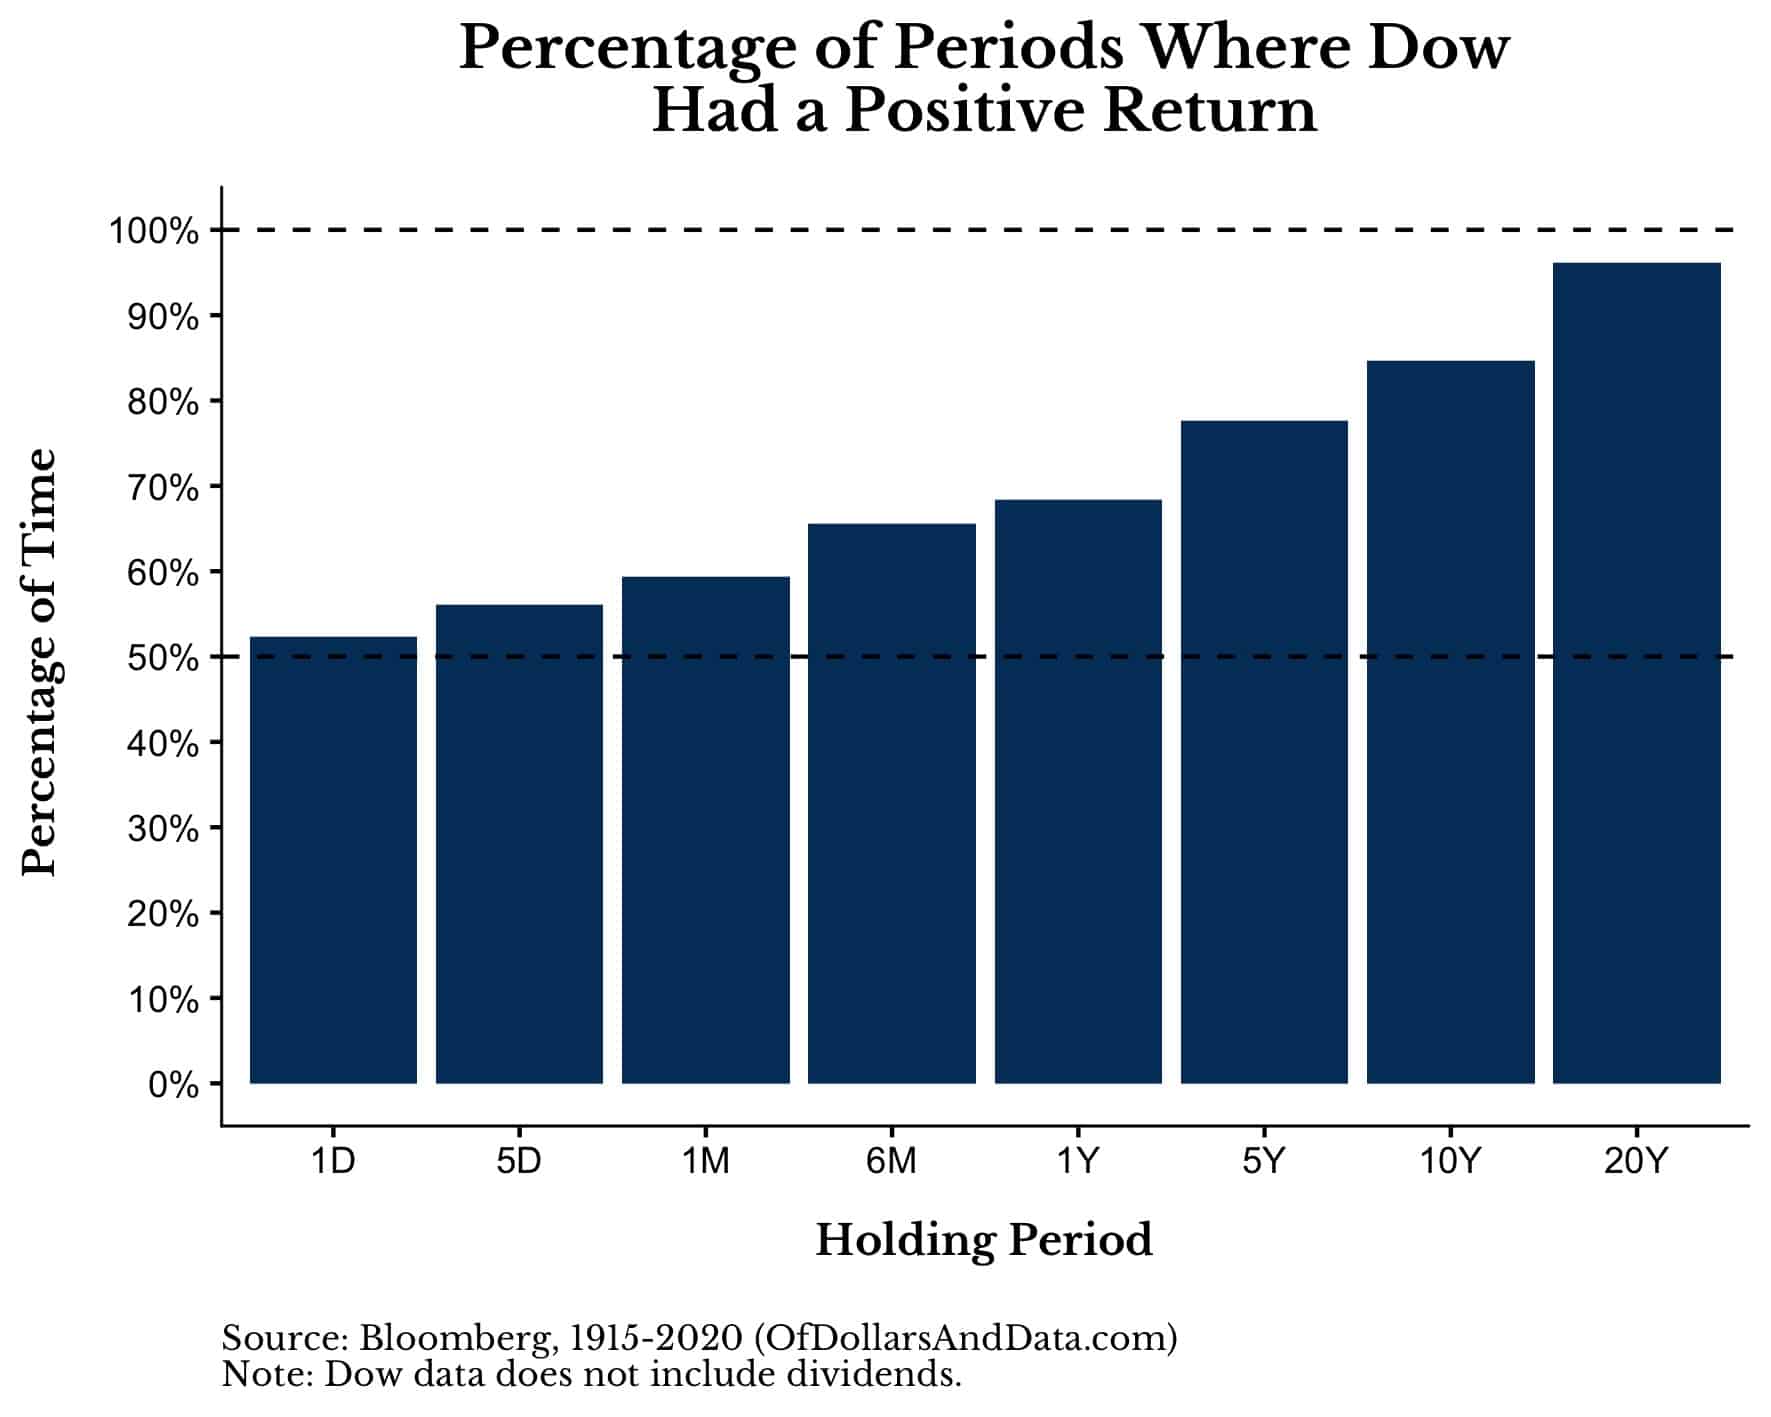 Percentage of holding periods where the Dow had a positive return, 1915-2020